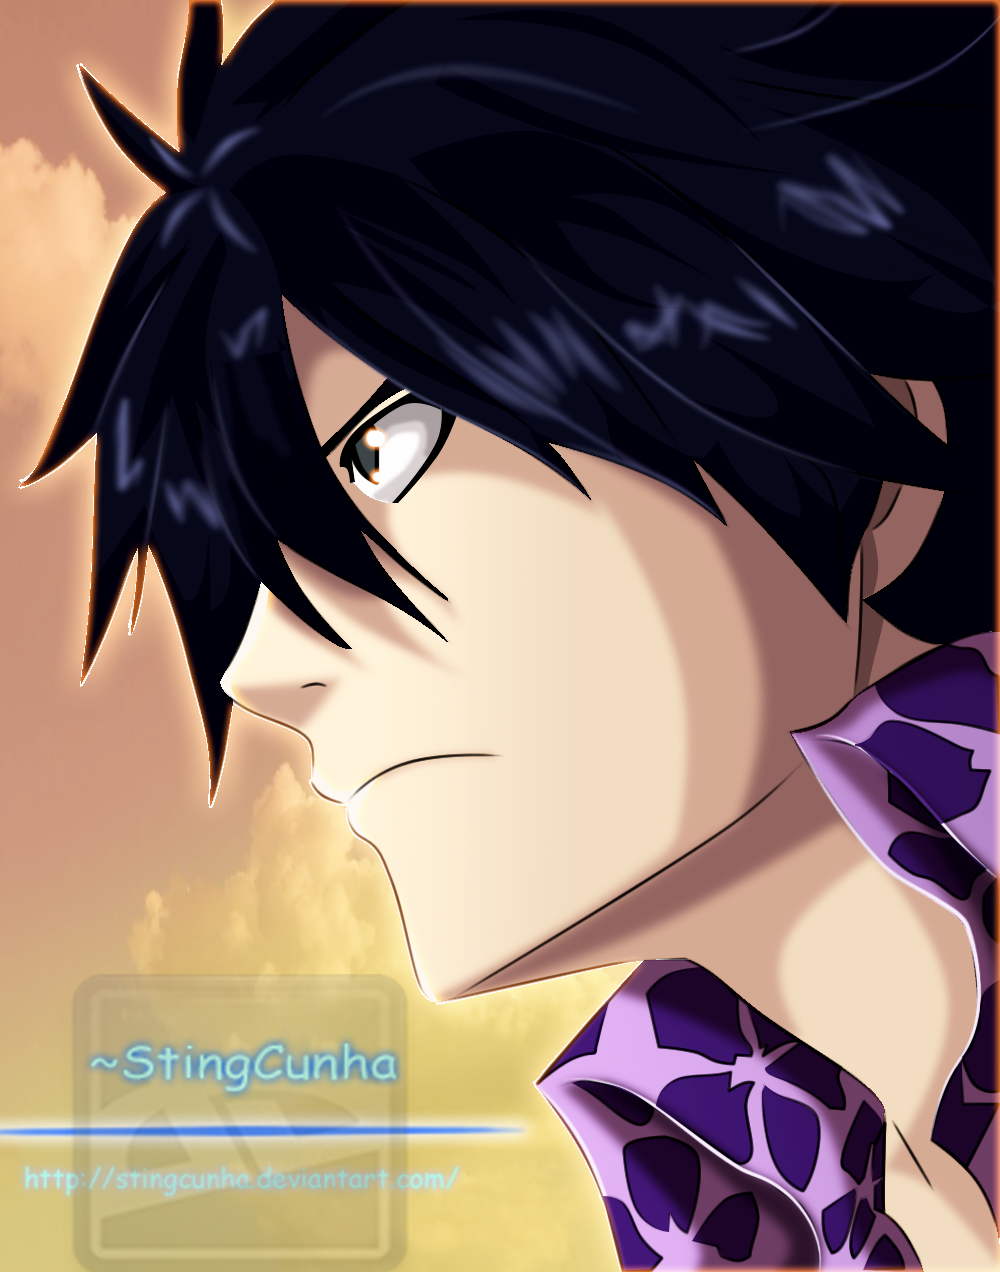 2023-03-01 - Gray Fullbuster - Fairy Tail - small by marcusagm on DeviantArt